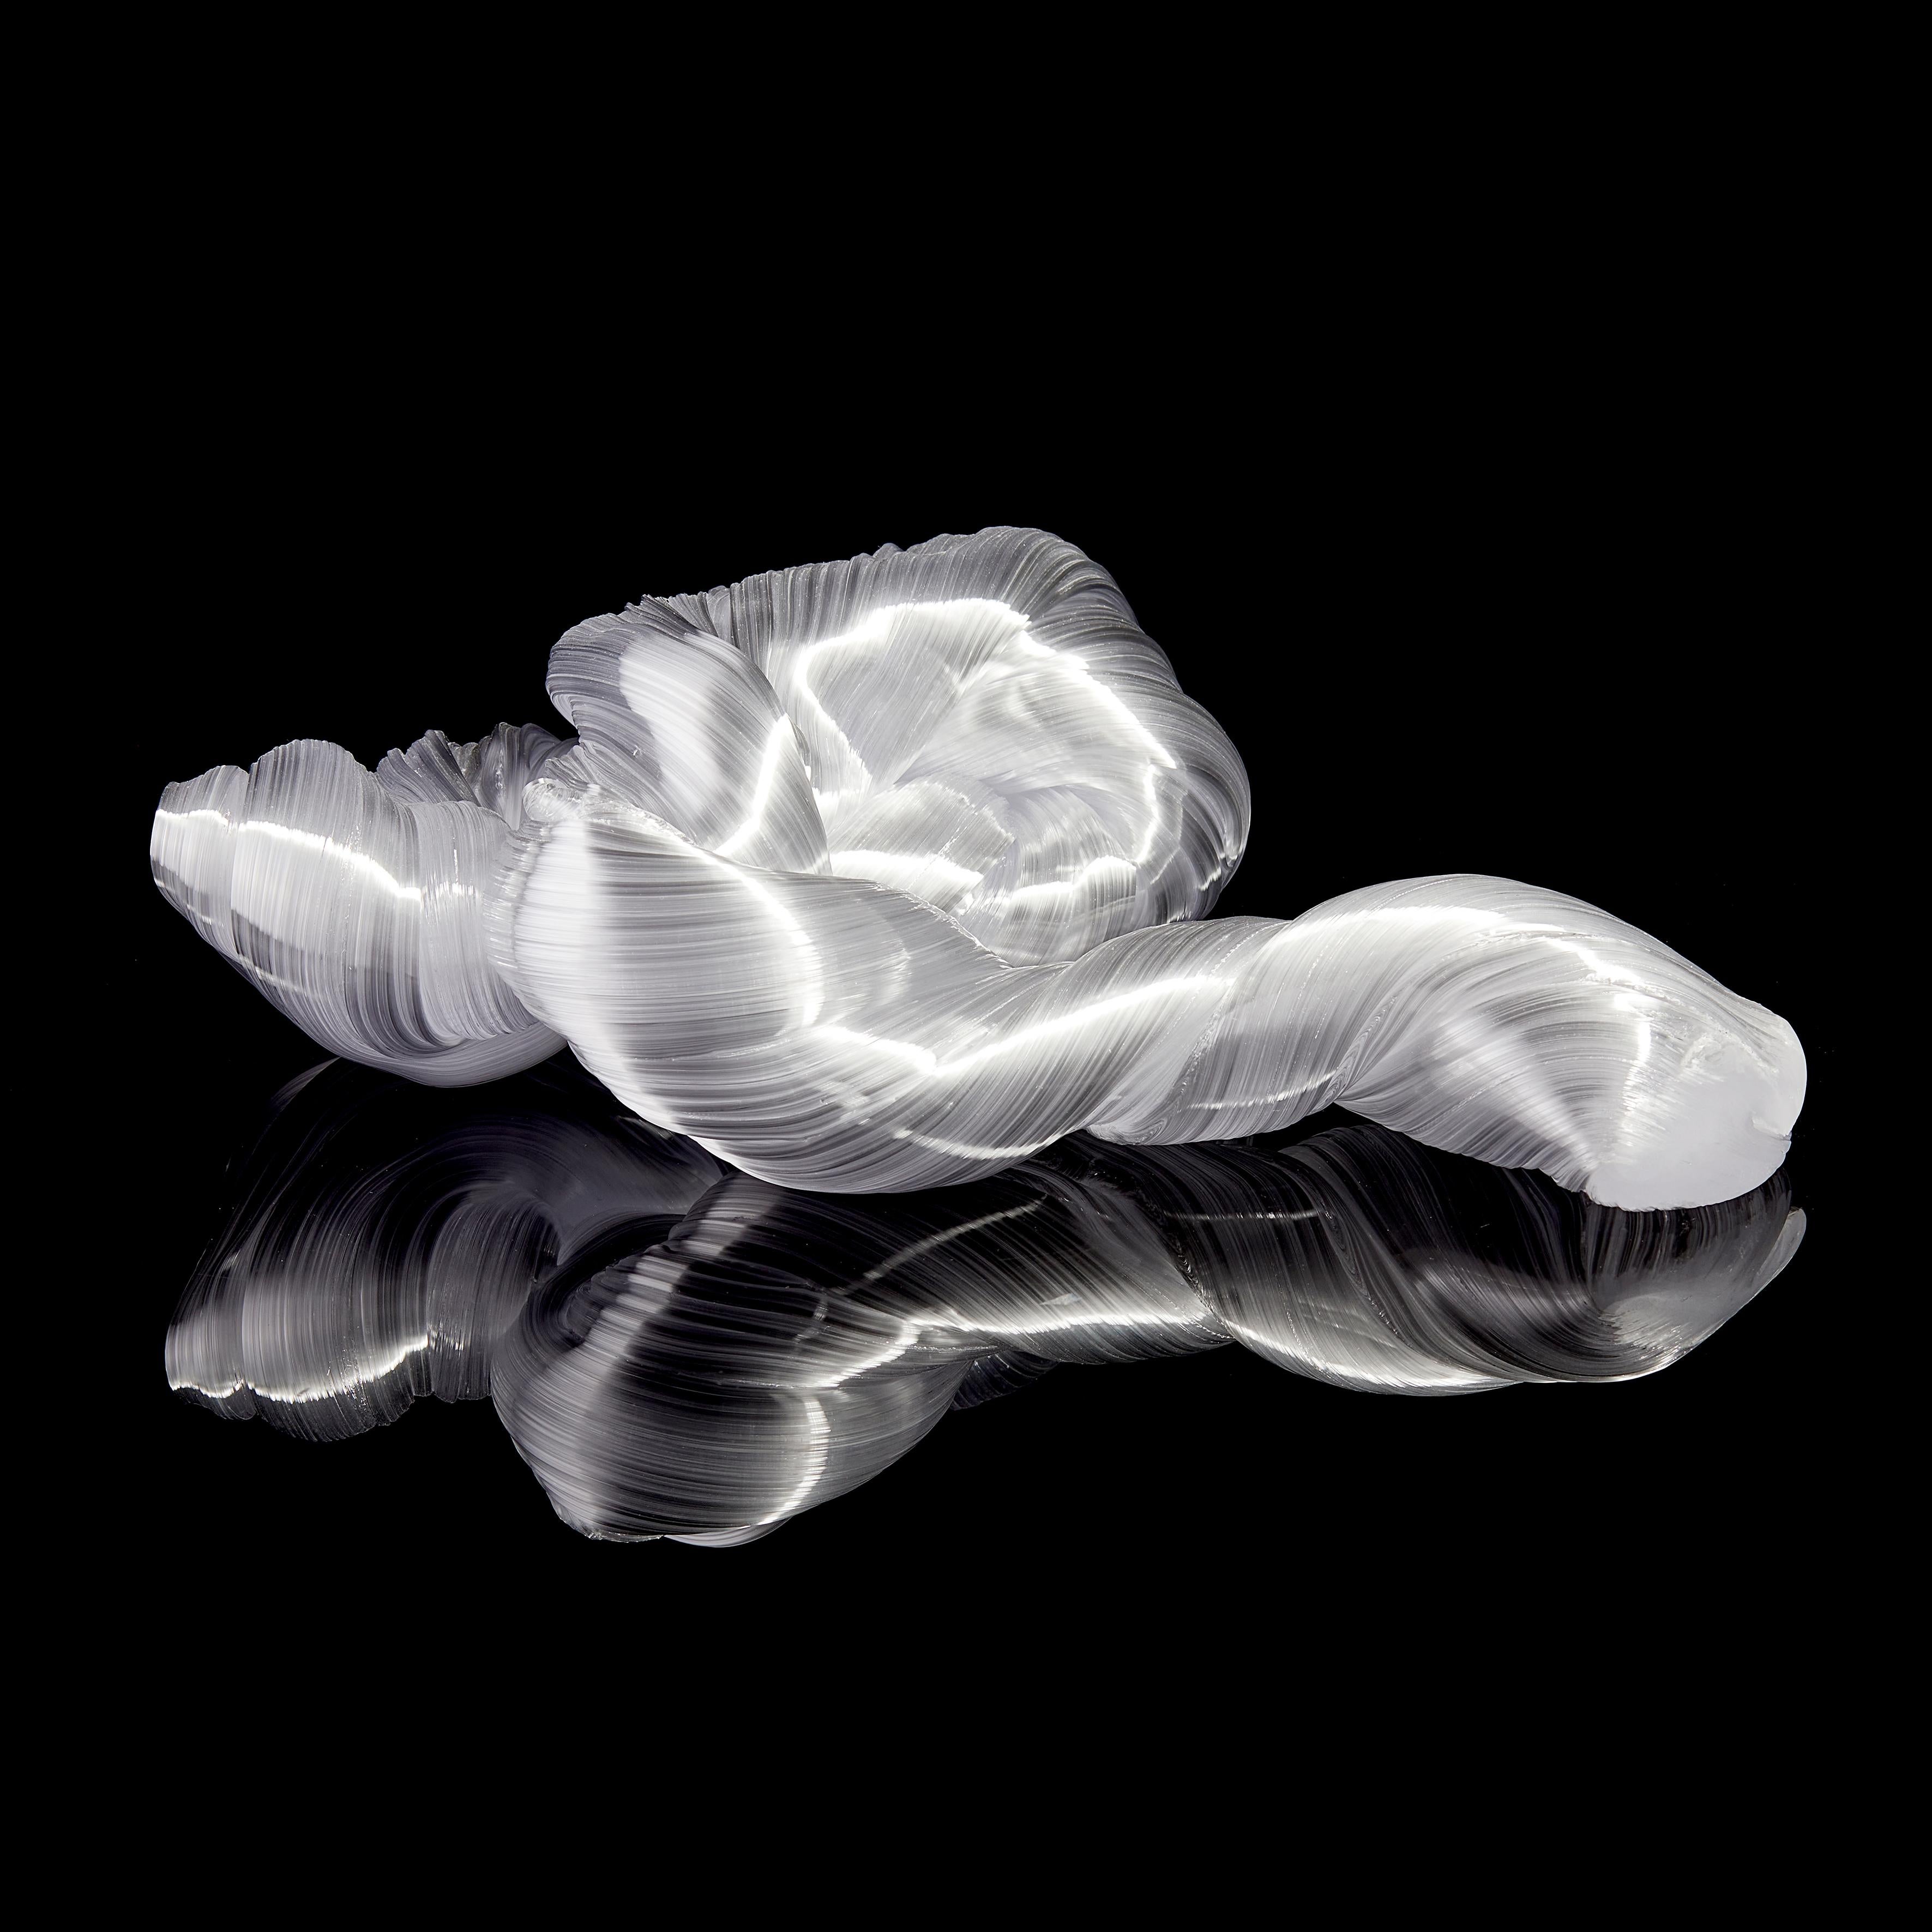 Folded Rock in white is a unique bronze glass sculpture by the Danish artist Maria Bang Espersen. With fluid lines and movement, this sculptural artwork is dramatic, elegant yet inspires the inner child with memories of candy canes and sugary